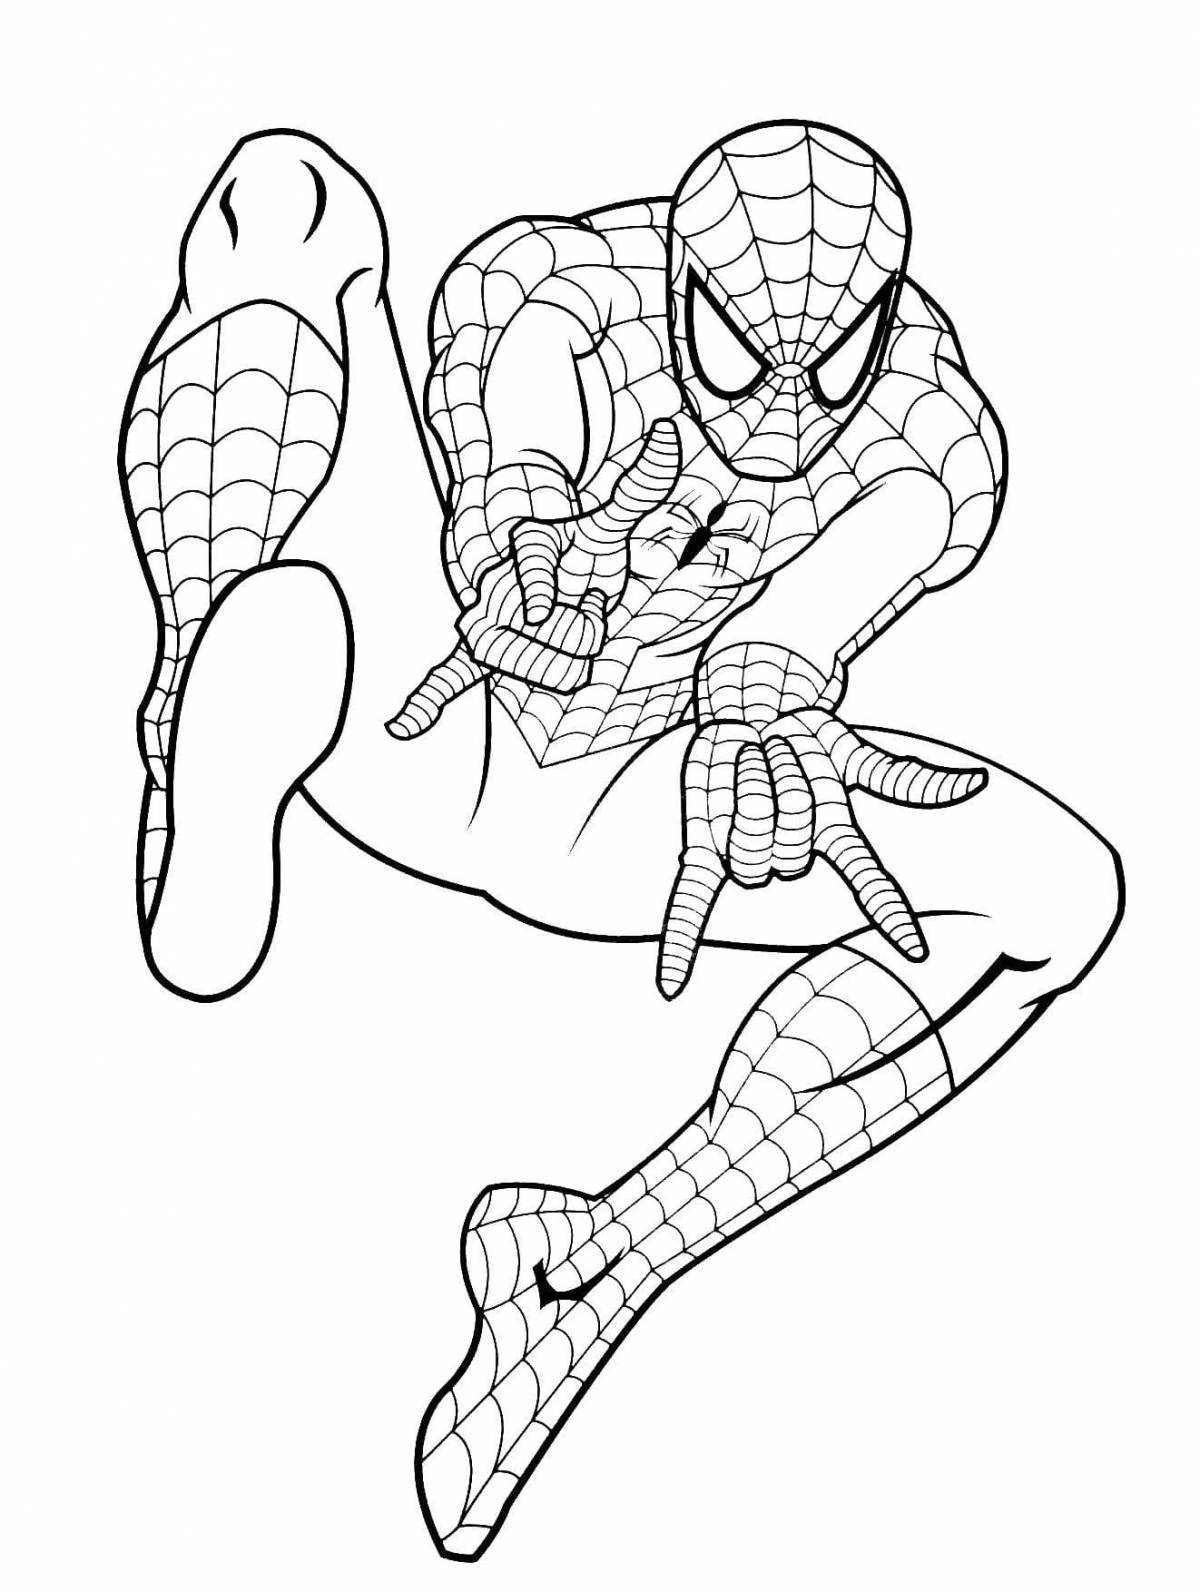 Adorable Spiderman Coloring Page for Boys